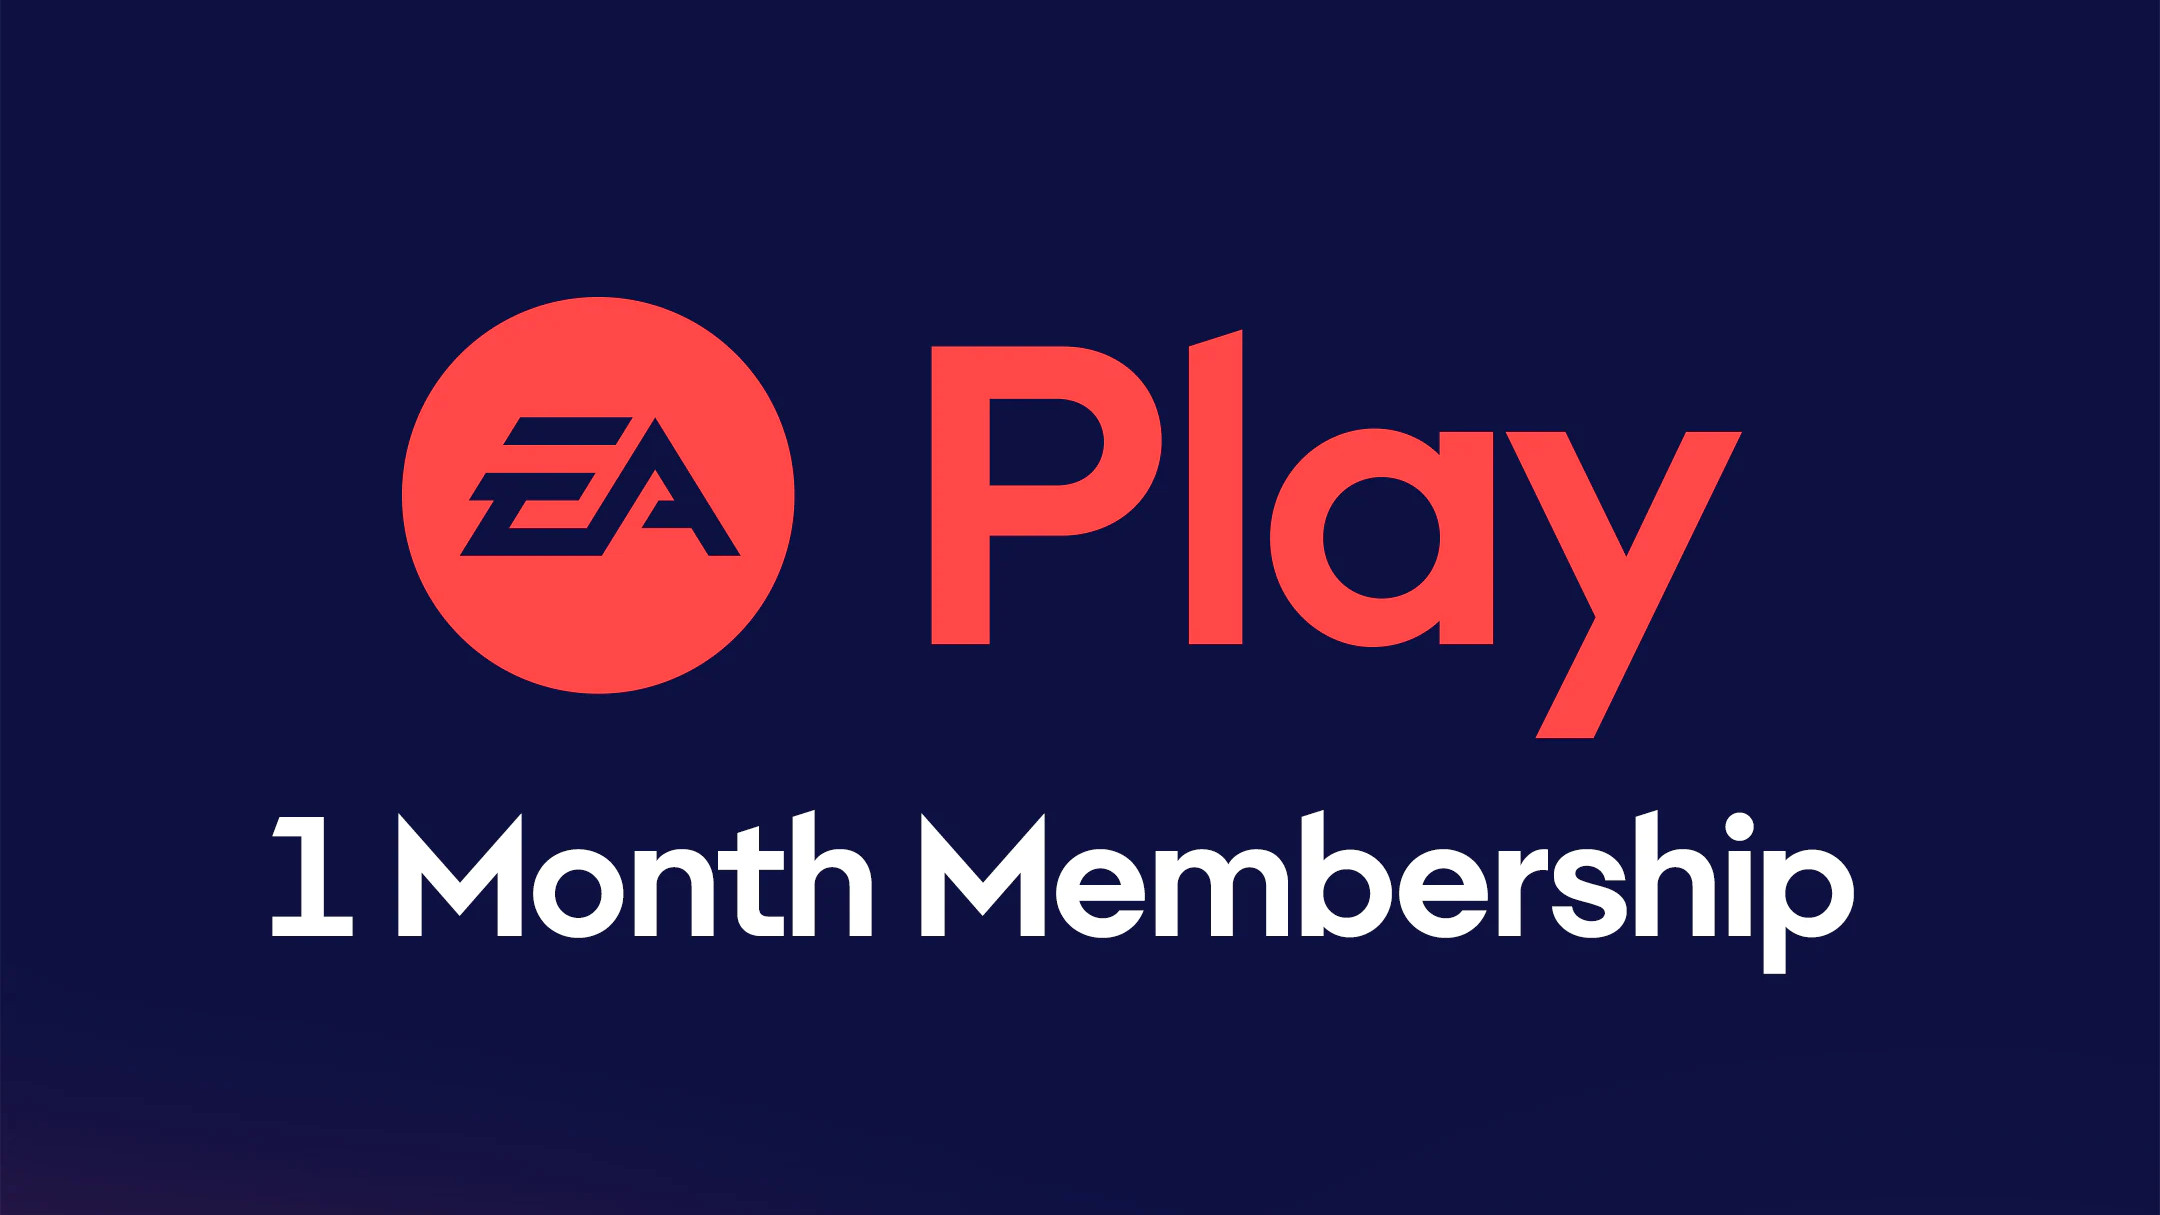 EA Play - 1 Month Subscription Key, 20.31 usd